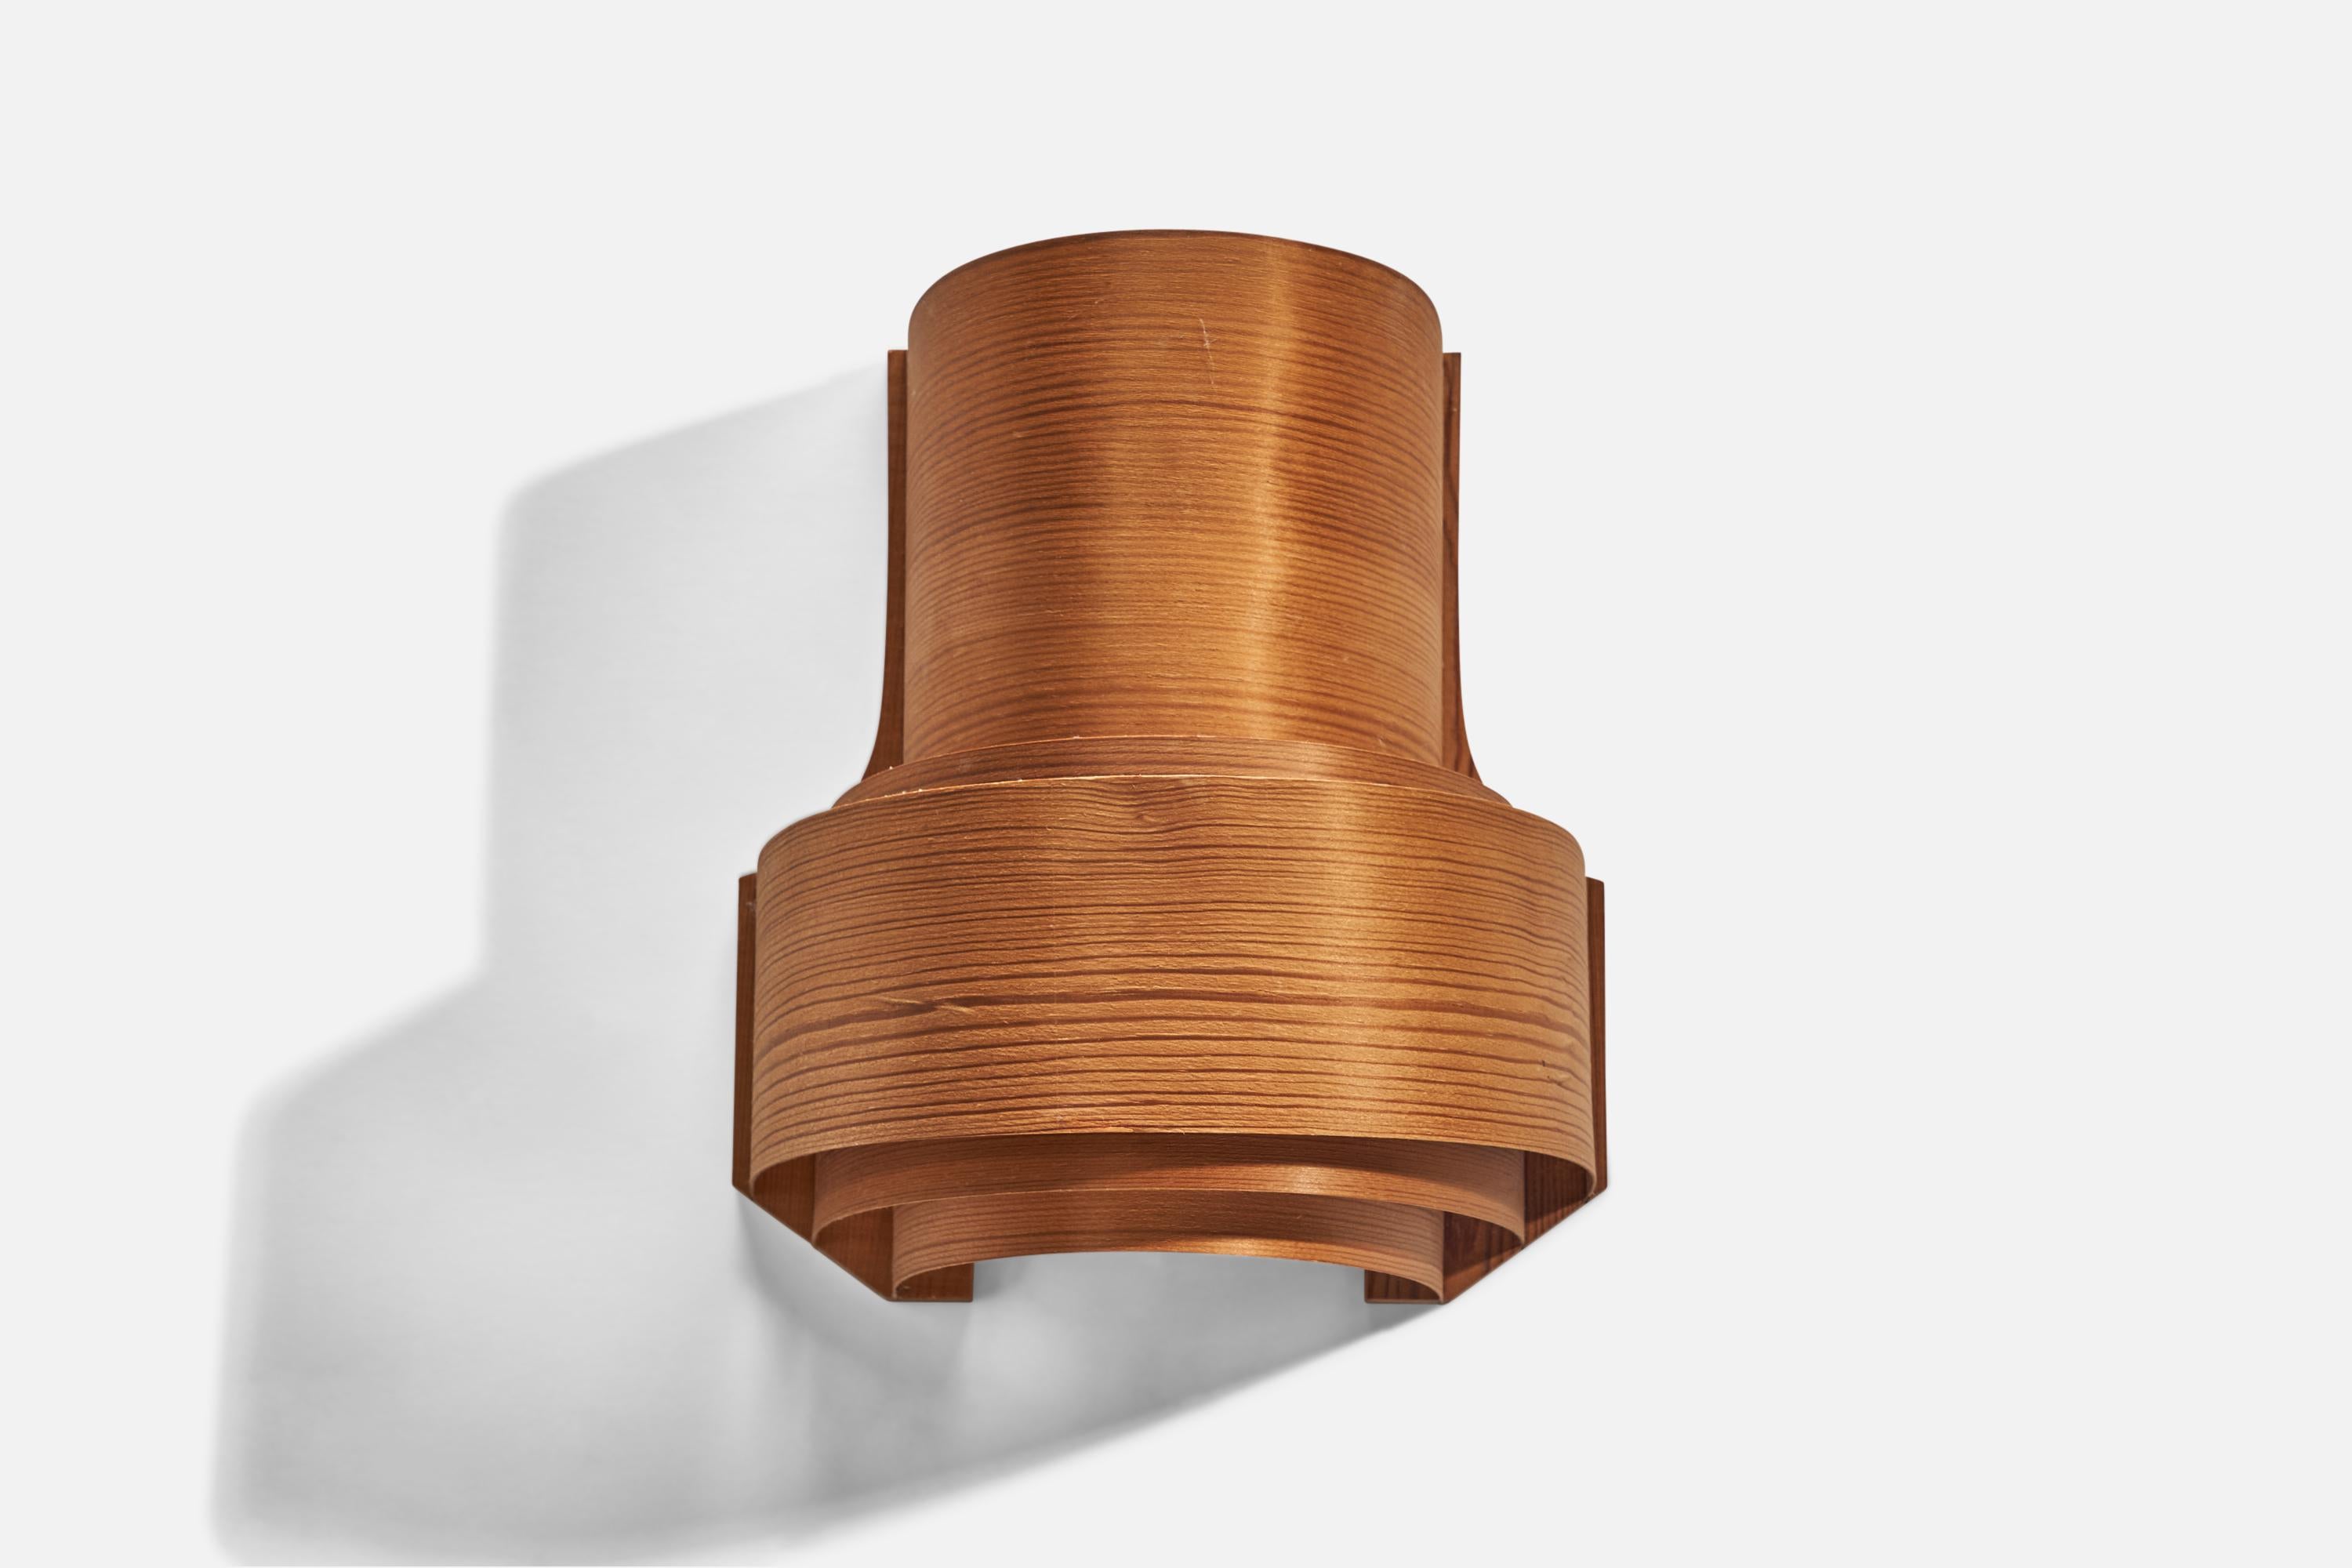 A pair of pine and moulded pine veneer sconces designed and produced in Denmark, 1970s.

Dimensions of Back Plate (inches) : 1.08 x 3.65 x 0.54 (Height x Width x Depth)

Sockets take standard E-26 medium base bulbs.

There is no maximum